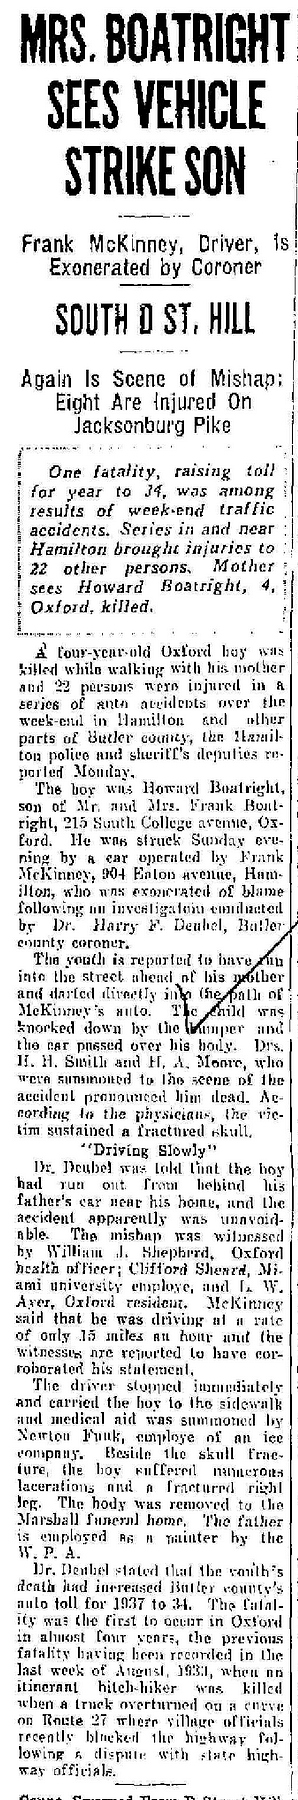 Orval Howard Boatright Newspaper Article: